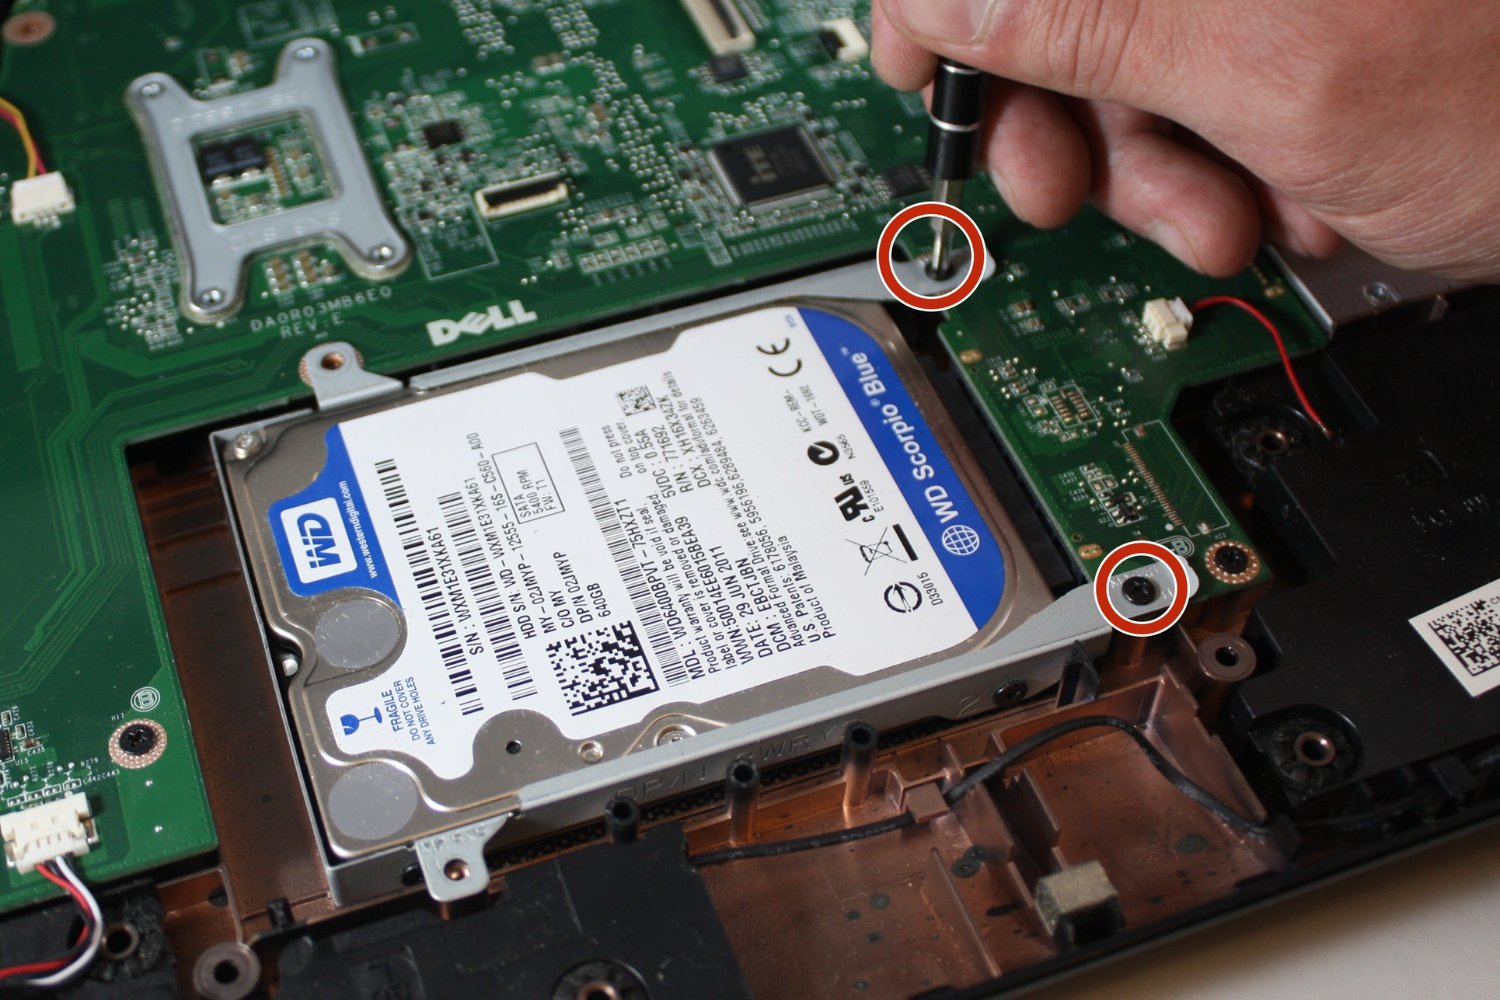 Dell Ultrabook: How To Take A Hard Drive Image